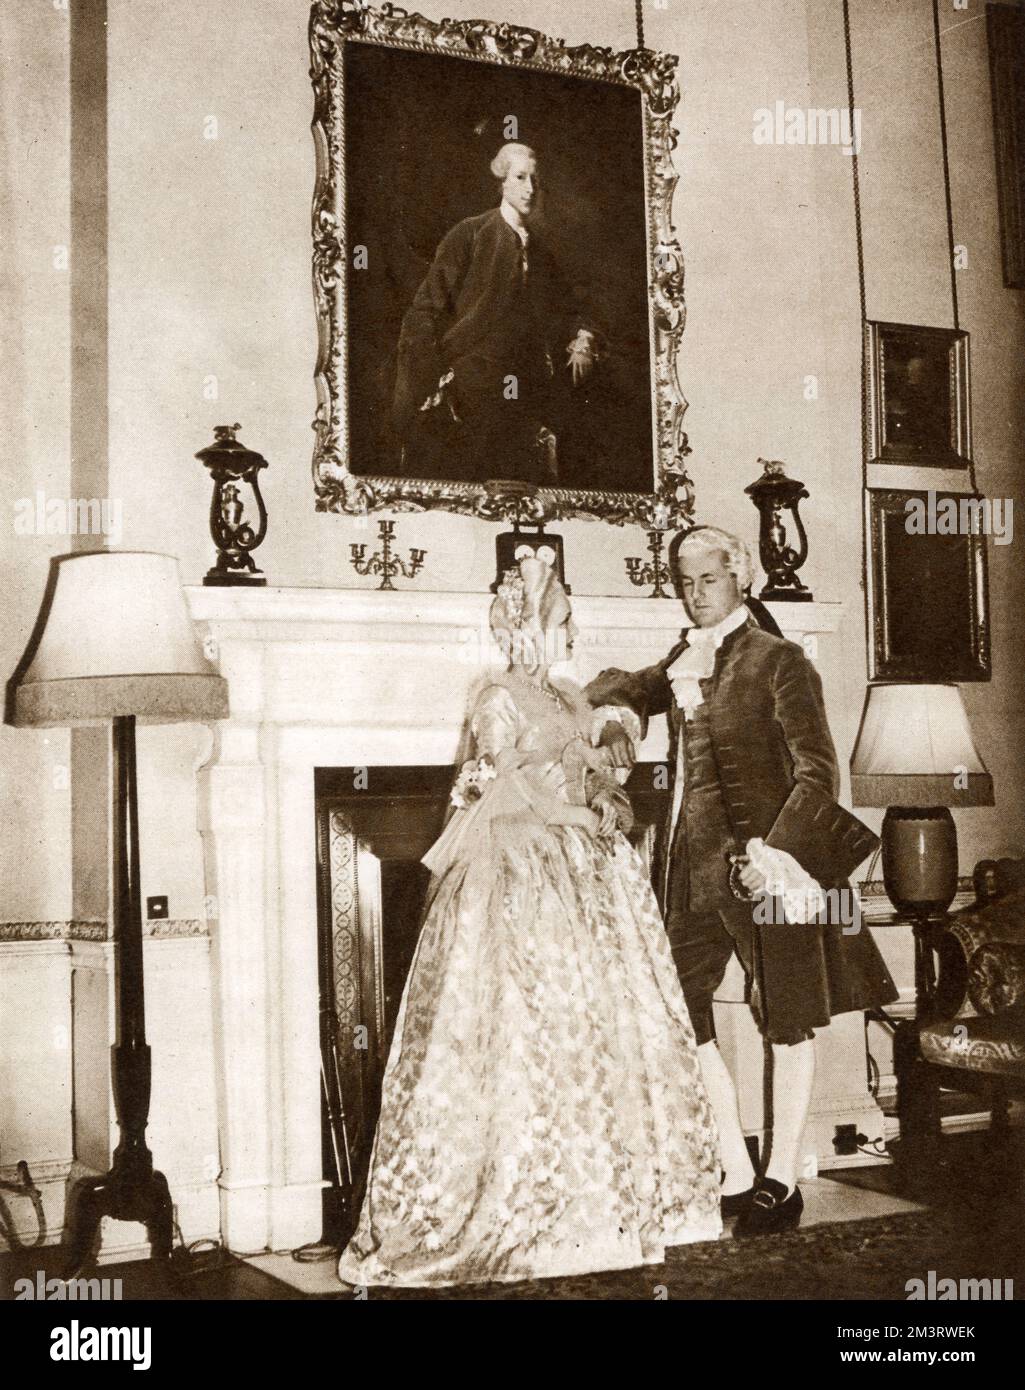 George Child Villiers(1910-1998), 9th Earl of Jersey and his second wife Virginia(1908-1996), the Countess of Jersey. Photographed under the portrait of his ancestor Francis Child at the Georgian Ball, held at Osterley Park in West London. Lord Jersey wore a replica of the costume shown in the painting.     Date: 1939 Stock Photo